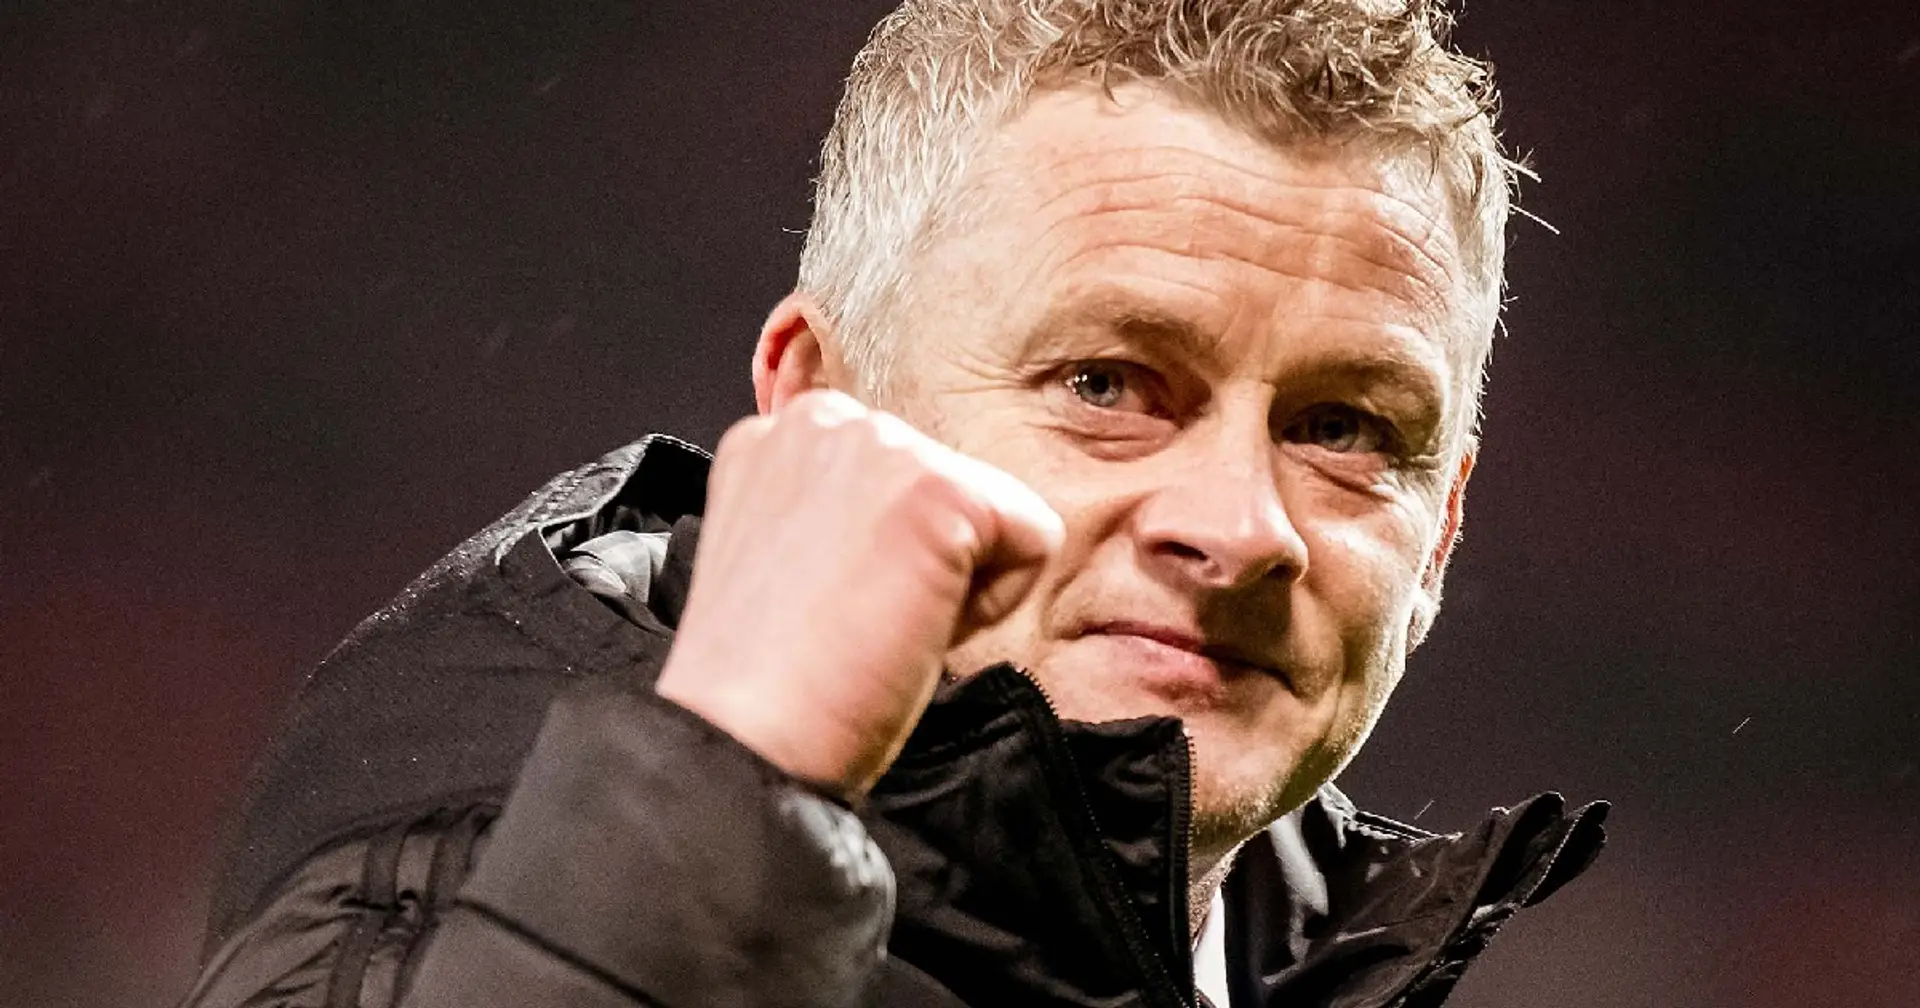 'Man United have shown we can bounce back after disappointments': Ole reacts to Man City loss 